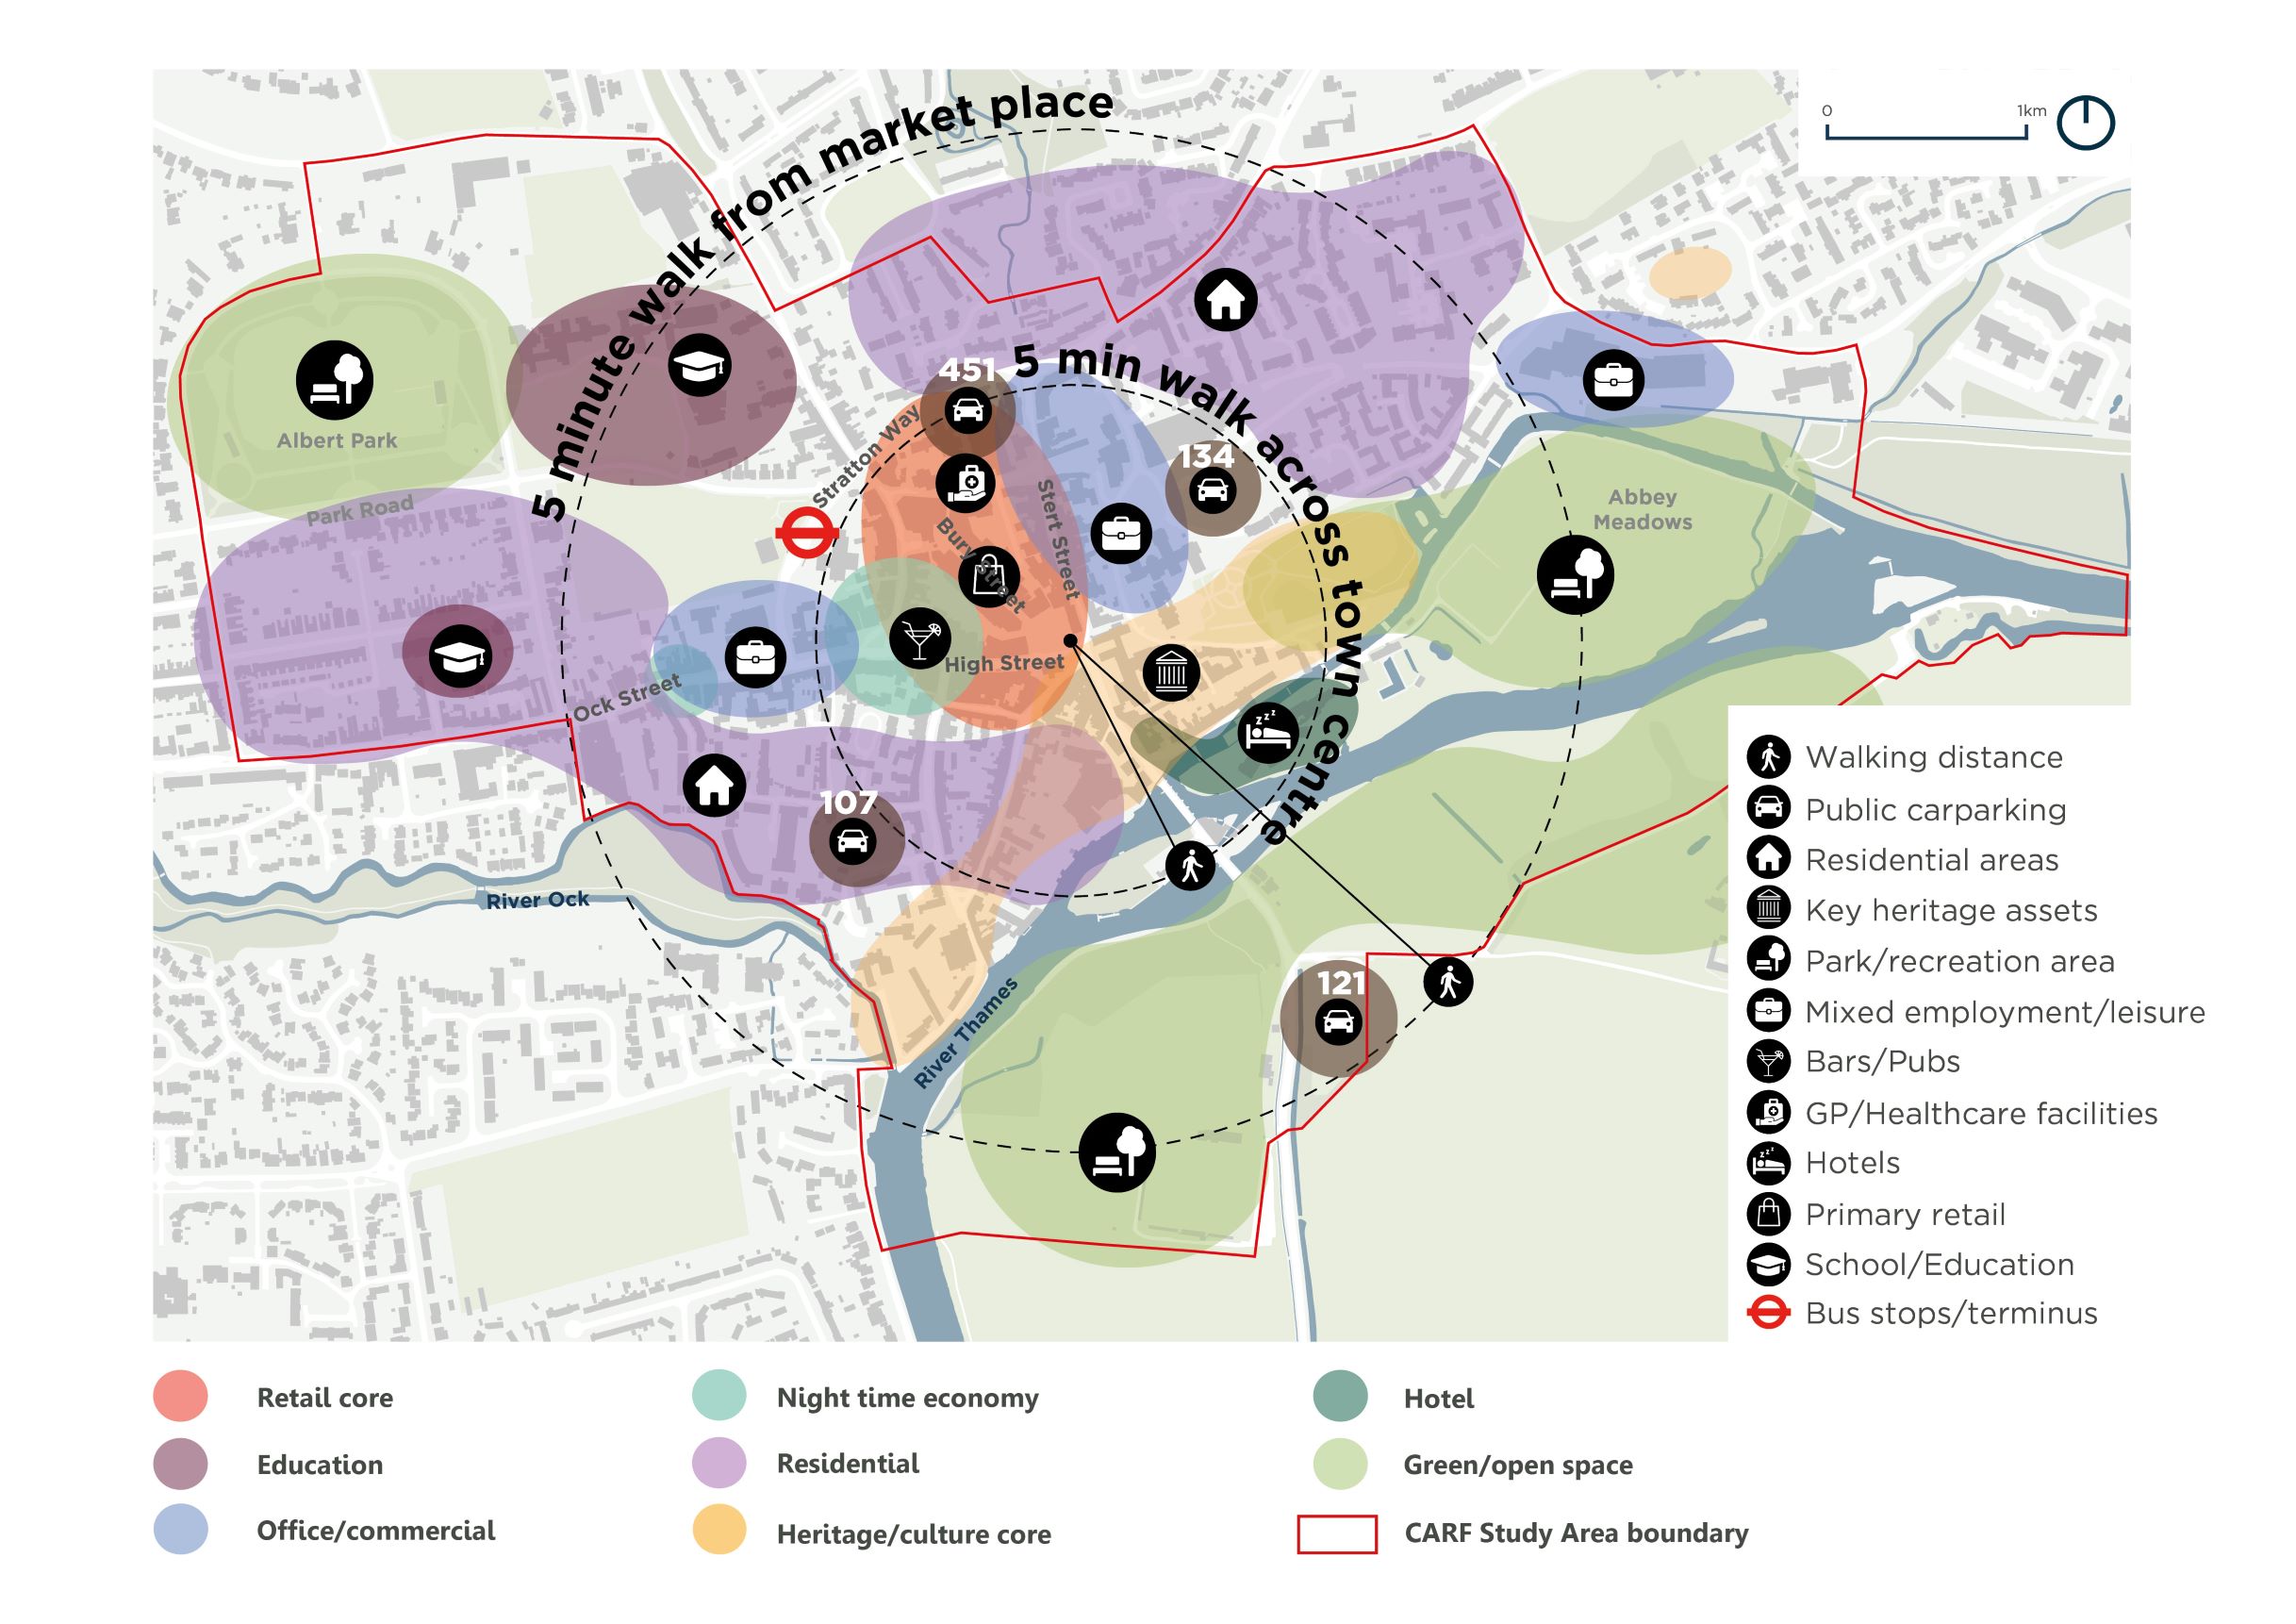 Plan showing existing and potential land use areas within the CARF area. The plan shows the retail core formed around Bury Street and commercial and office uses along Stert Street, with the towns heritage and culture core located around Abbey Gate and the County Hall Musuem. The plan shows most of the predominantly residential areas are on the outskirts of the town centre, more than a 5 minute walk from Market Place. The plan shows public parking is accessible with most carparks located within a 2-5 minute walk of the Market Place with potential to enhance the Park and Walk strategy in the town centre.